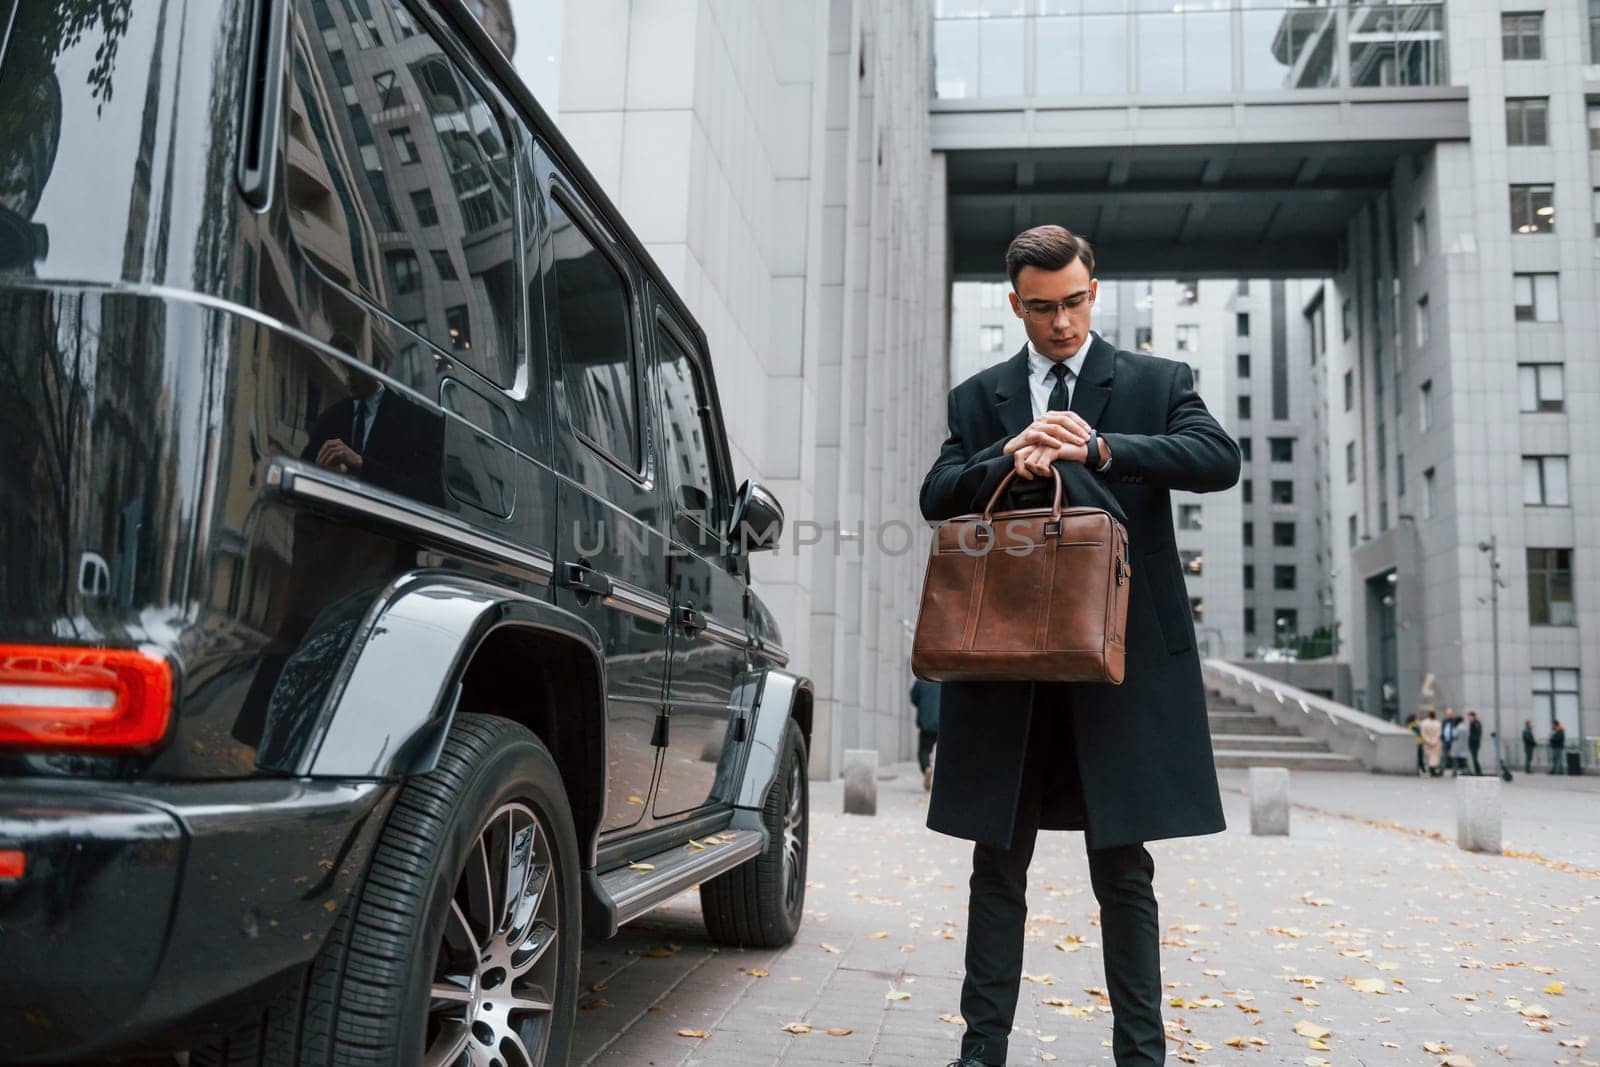 Standing near black car. Businessman in black suit and tie is outdoors in the city by Standret